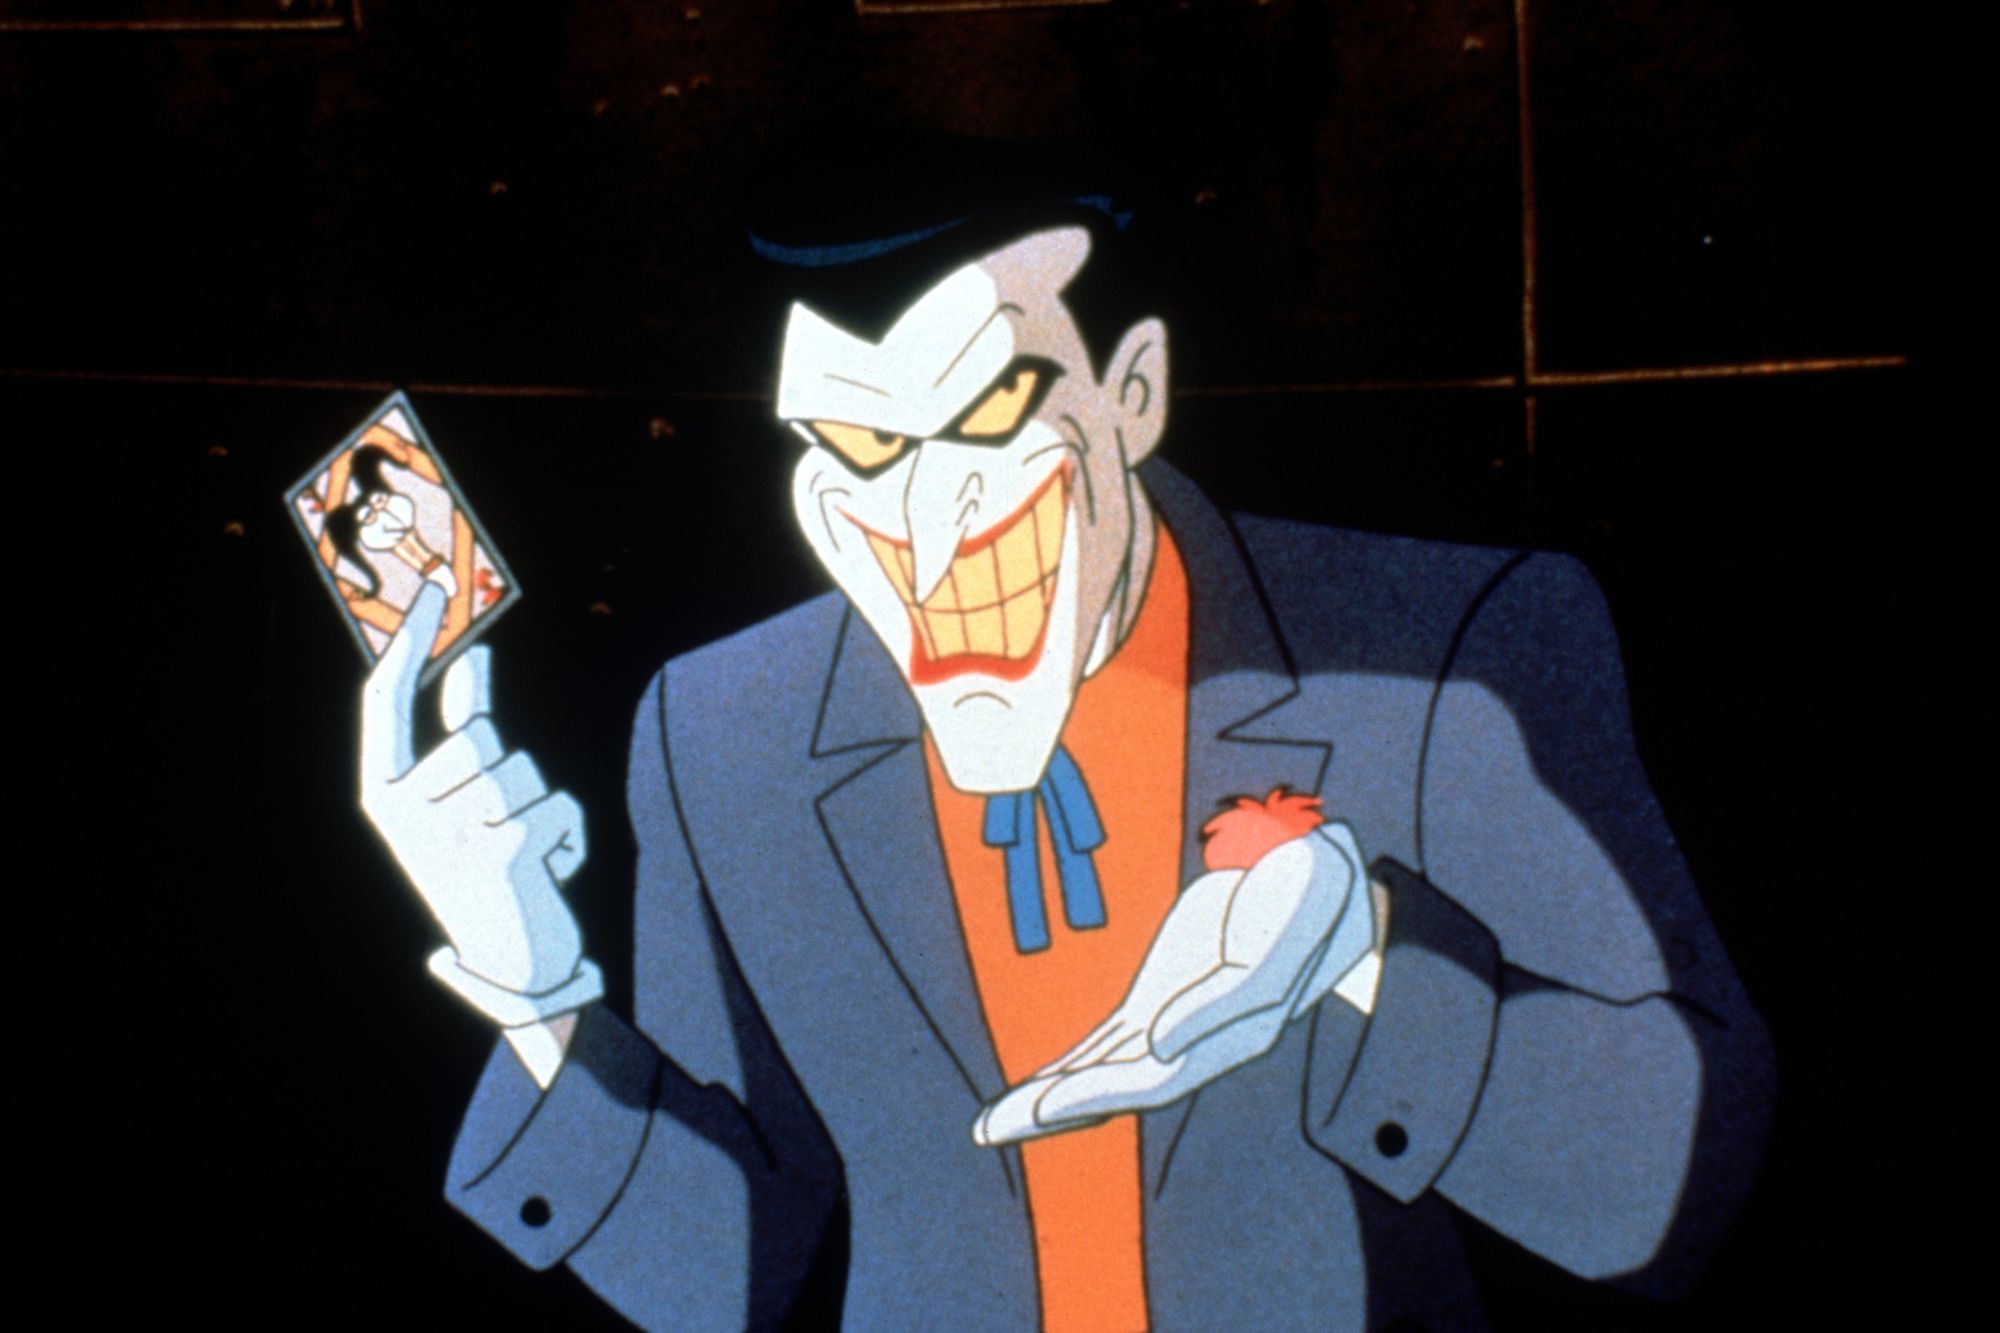 The Joker from Batman: The Animated Series